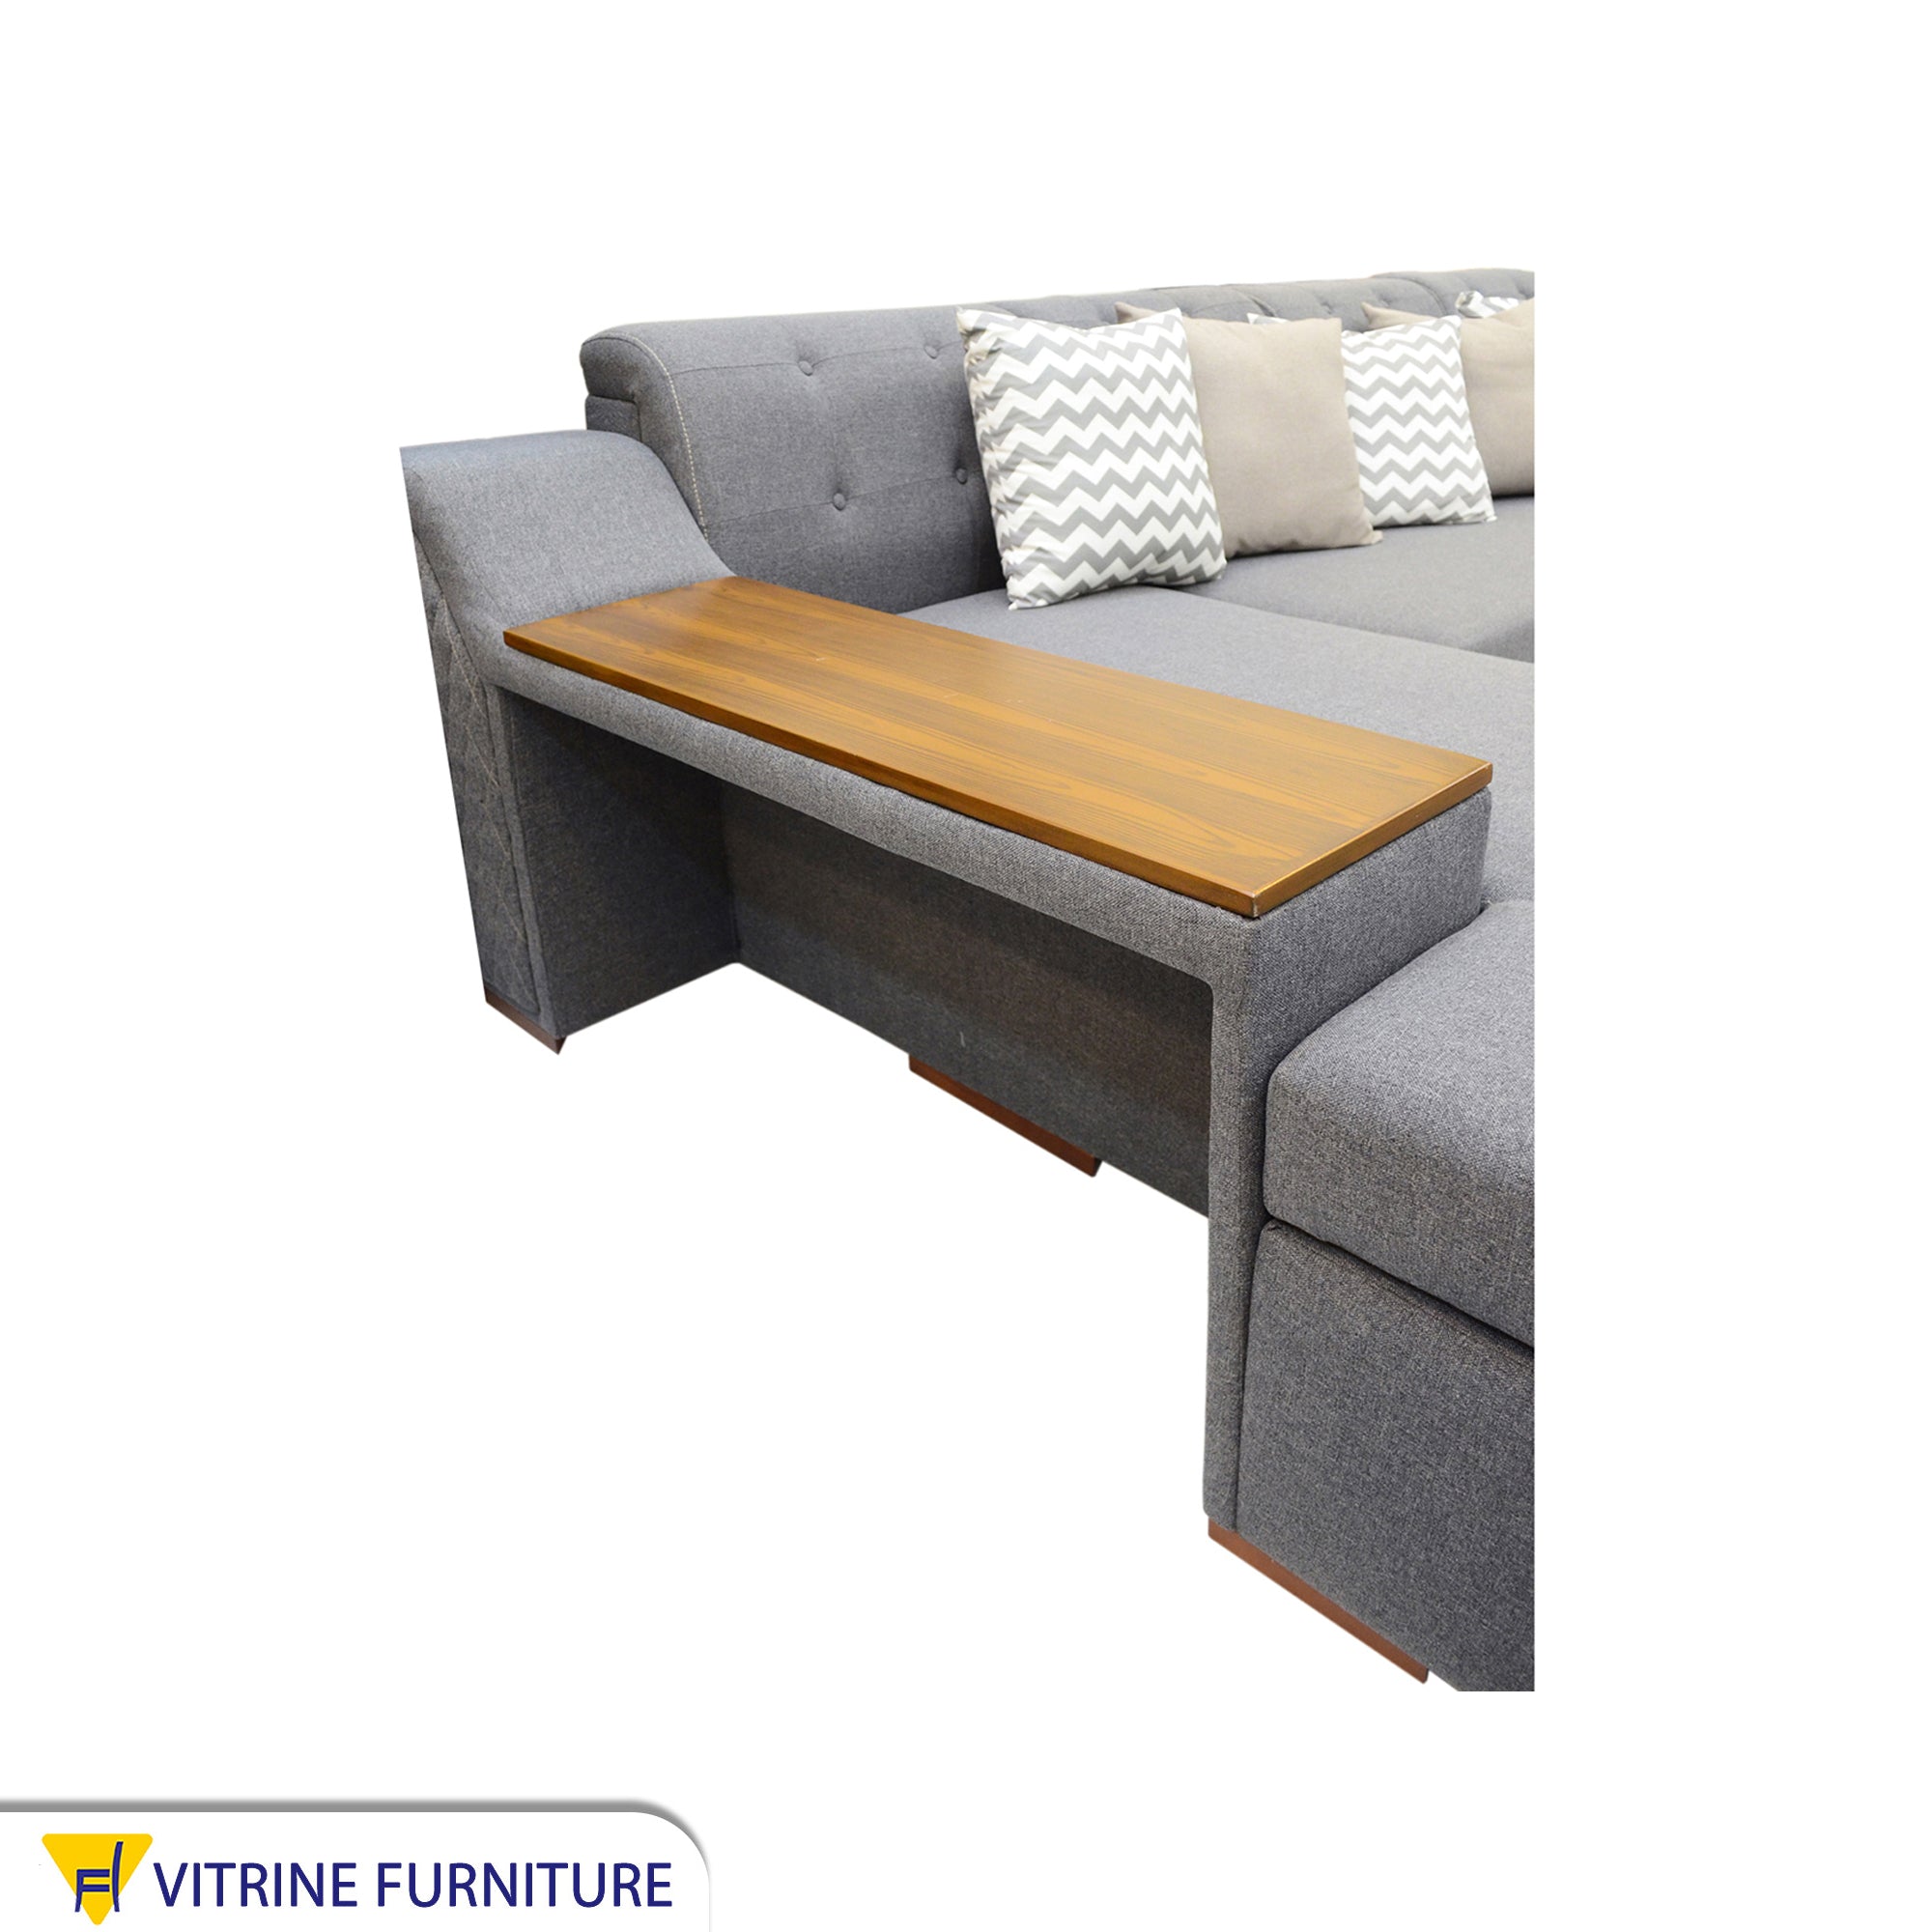 Grey Corner Bed, sofa and built-in table